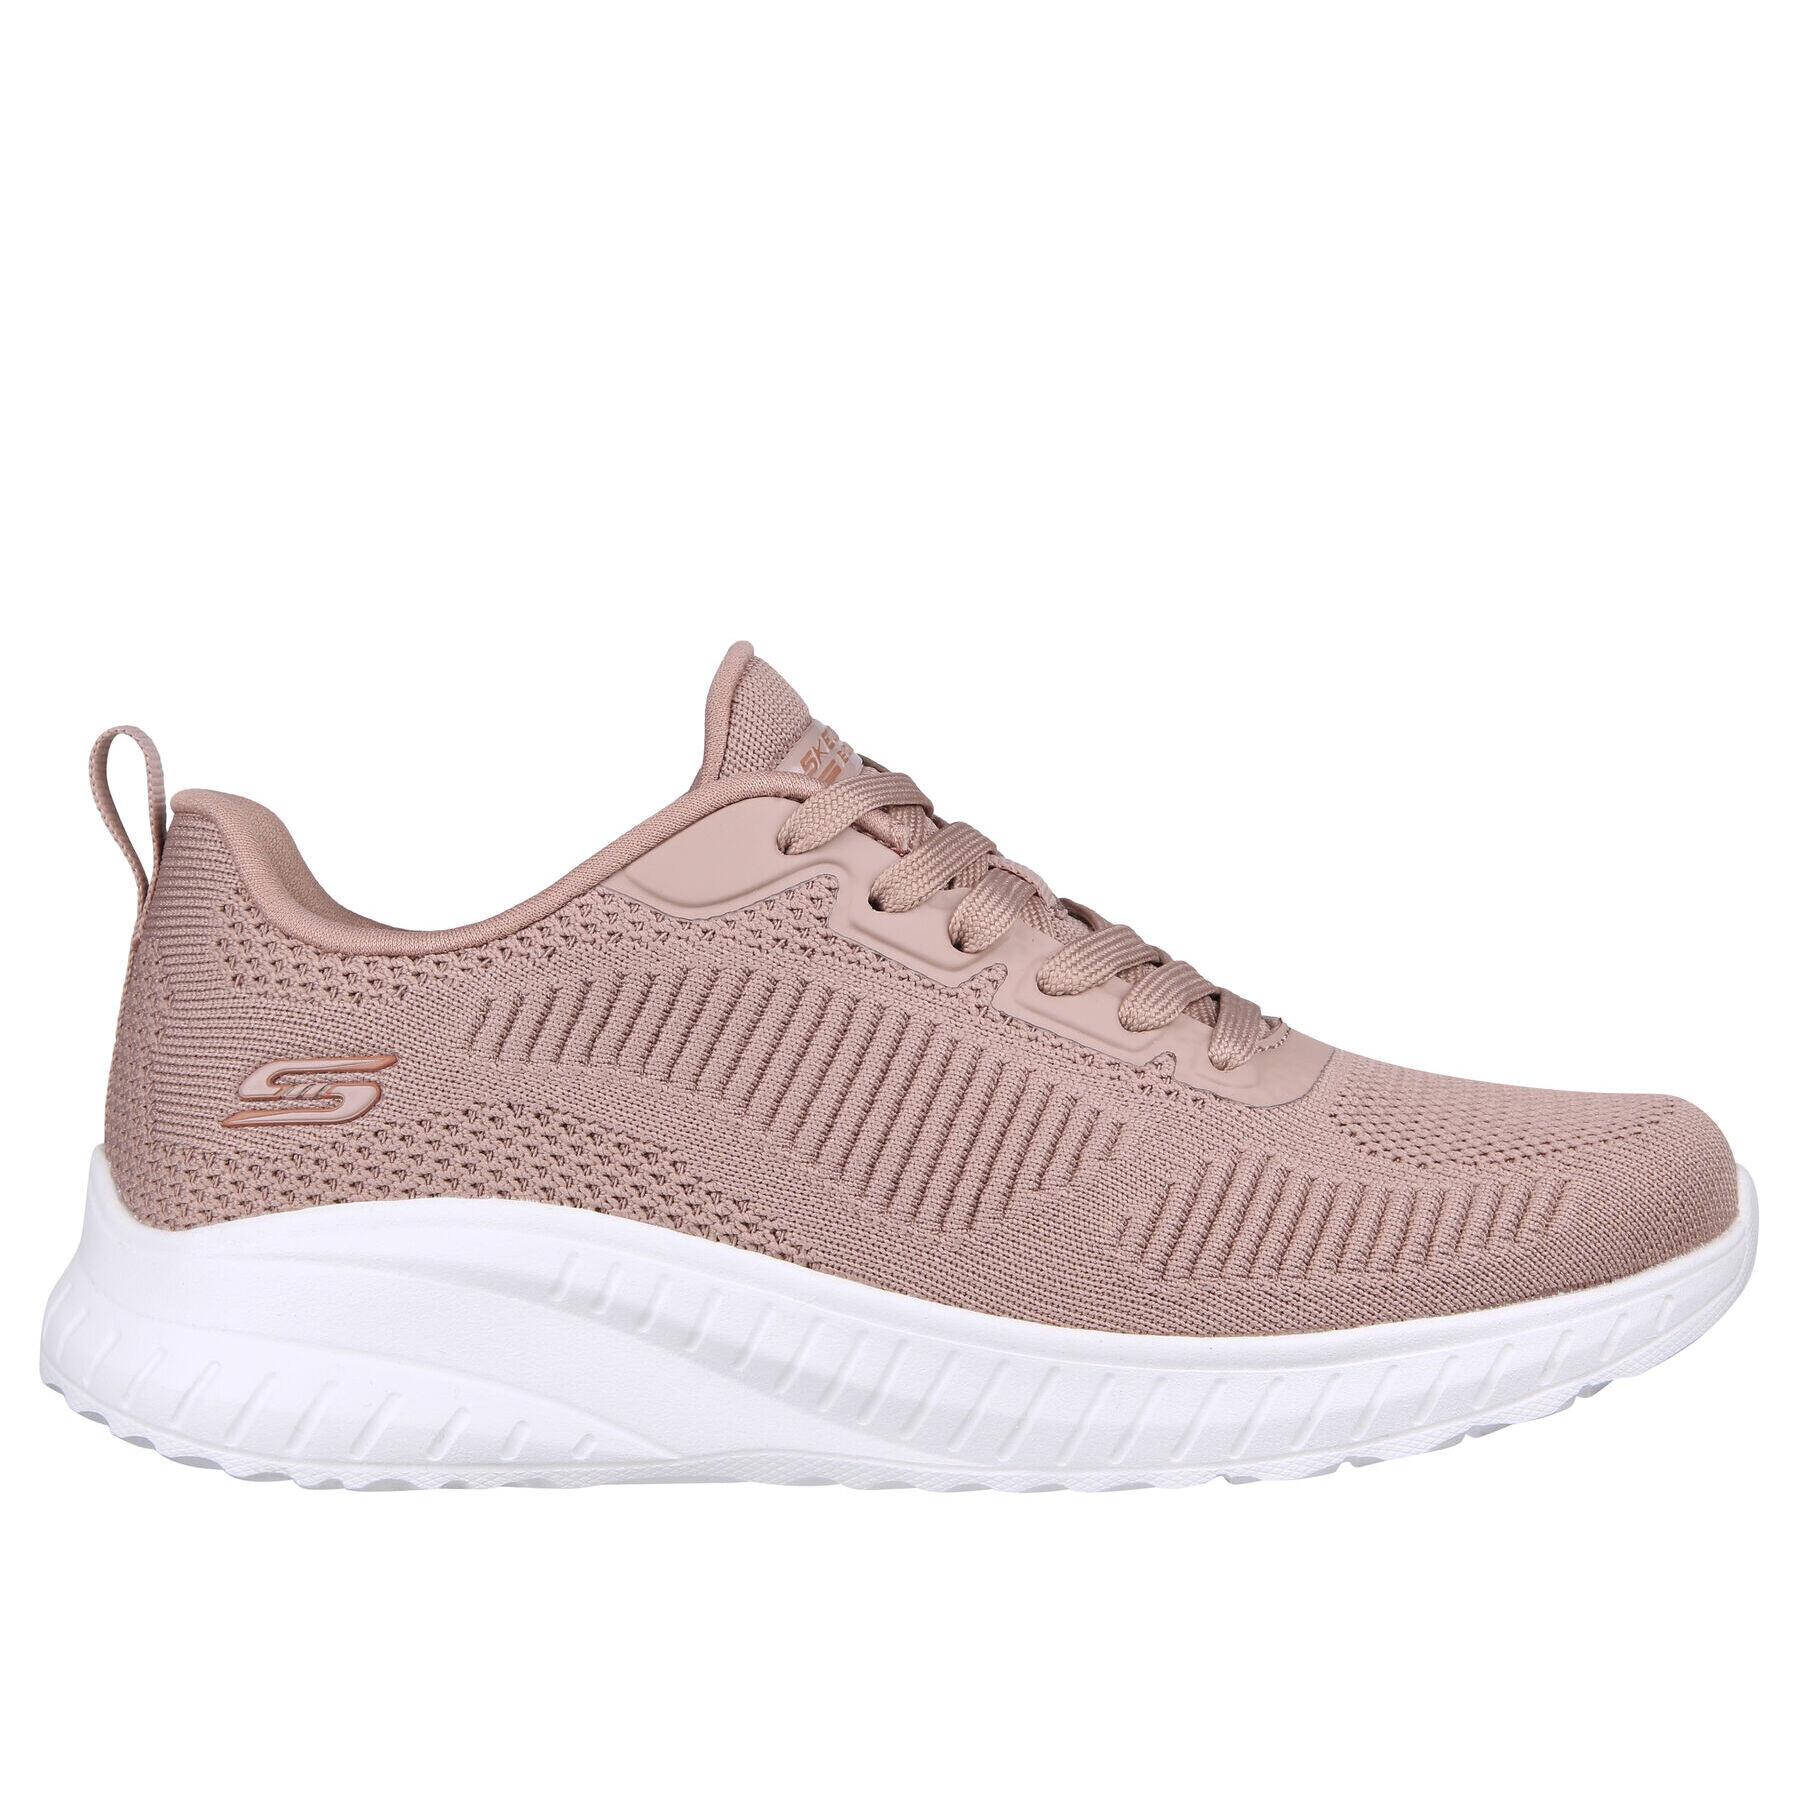 Sneakers für Frauen Skechers Bobs Squad Chaos Face Off